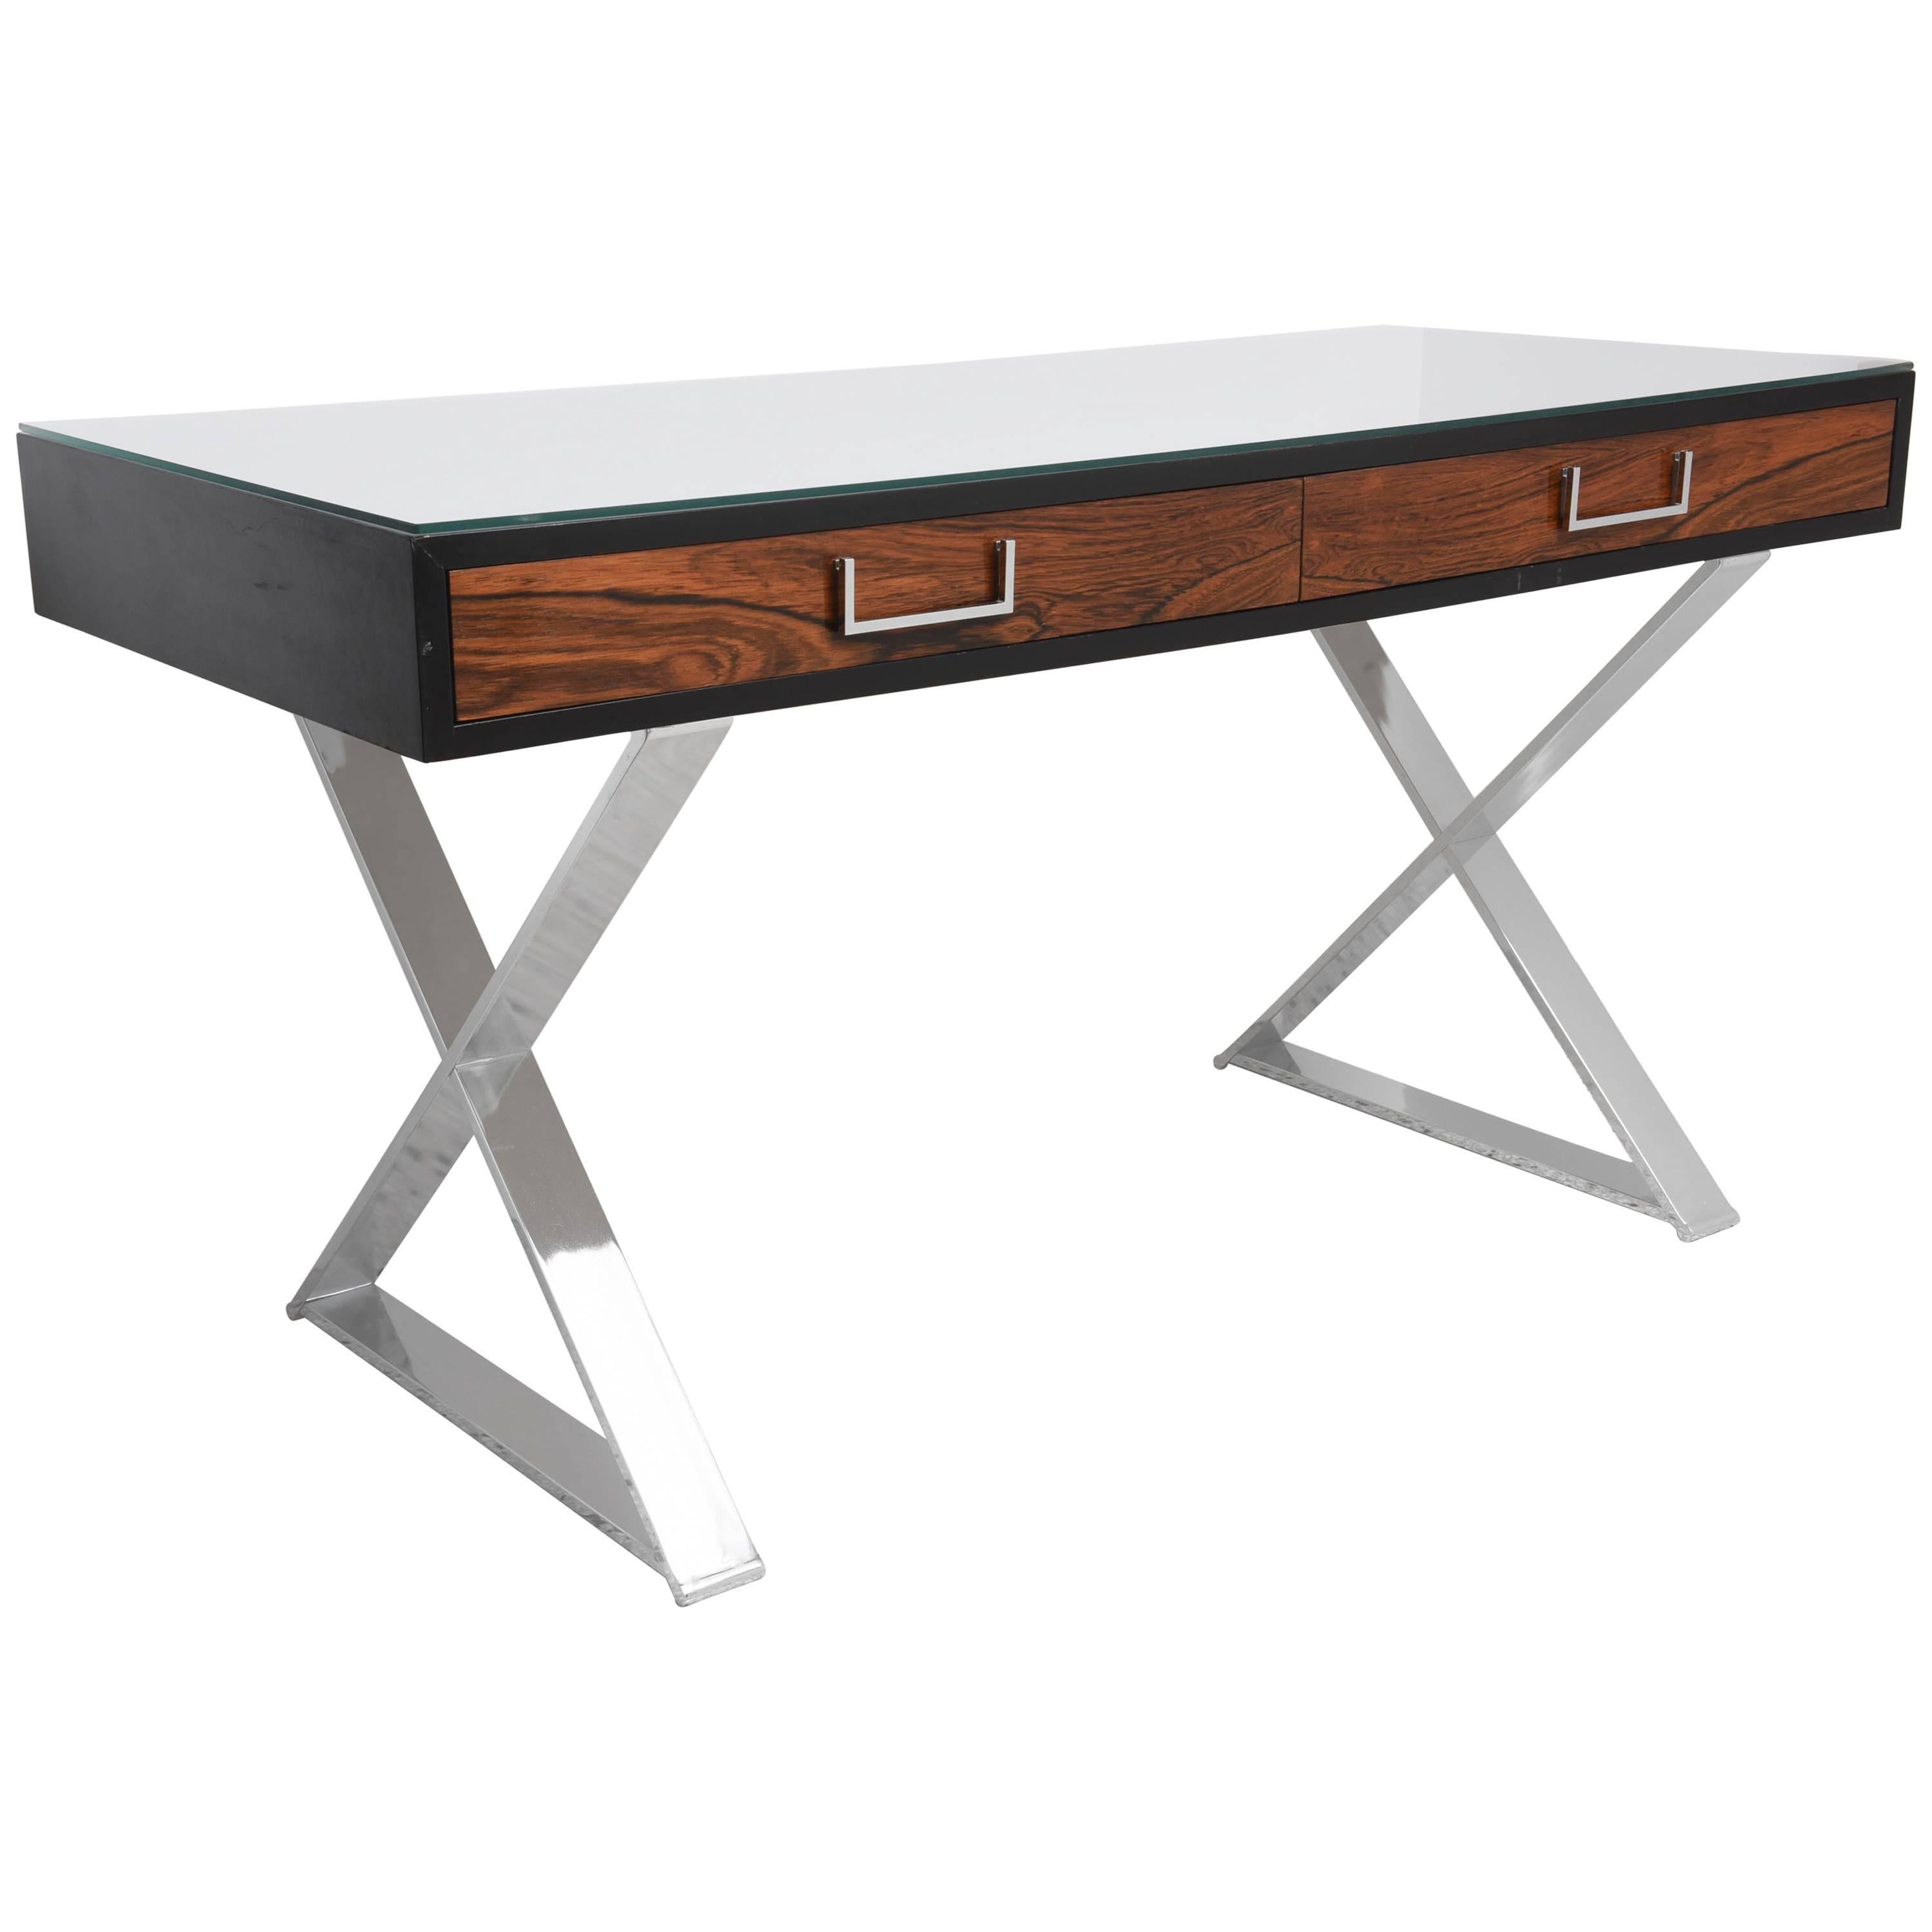 Milo Baughman Two-Drawer, X-Base Campaign Desk in Rosewood and Black Lacquer